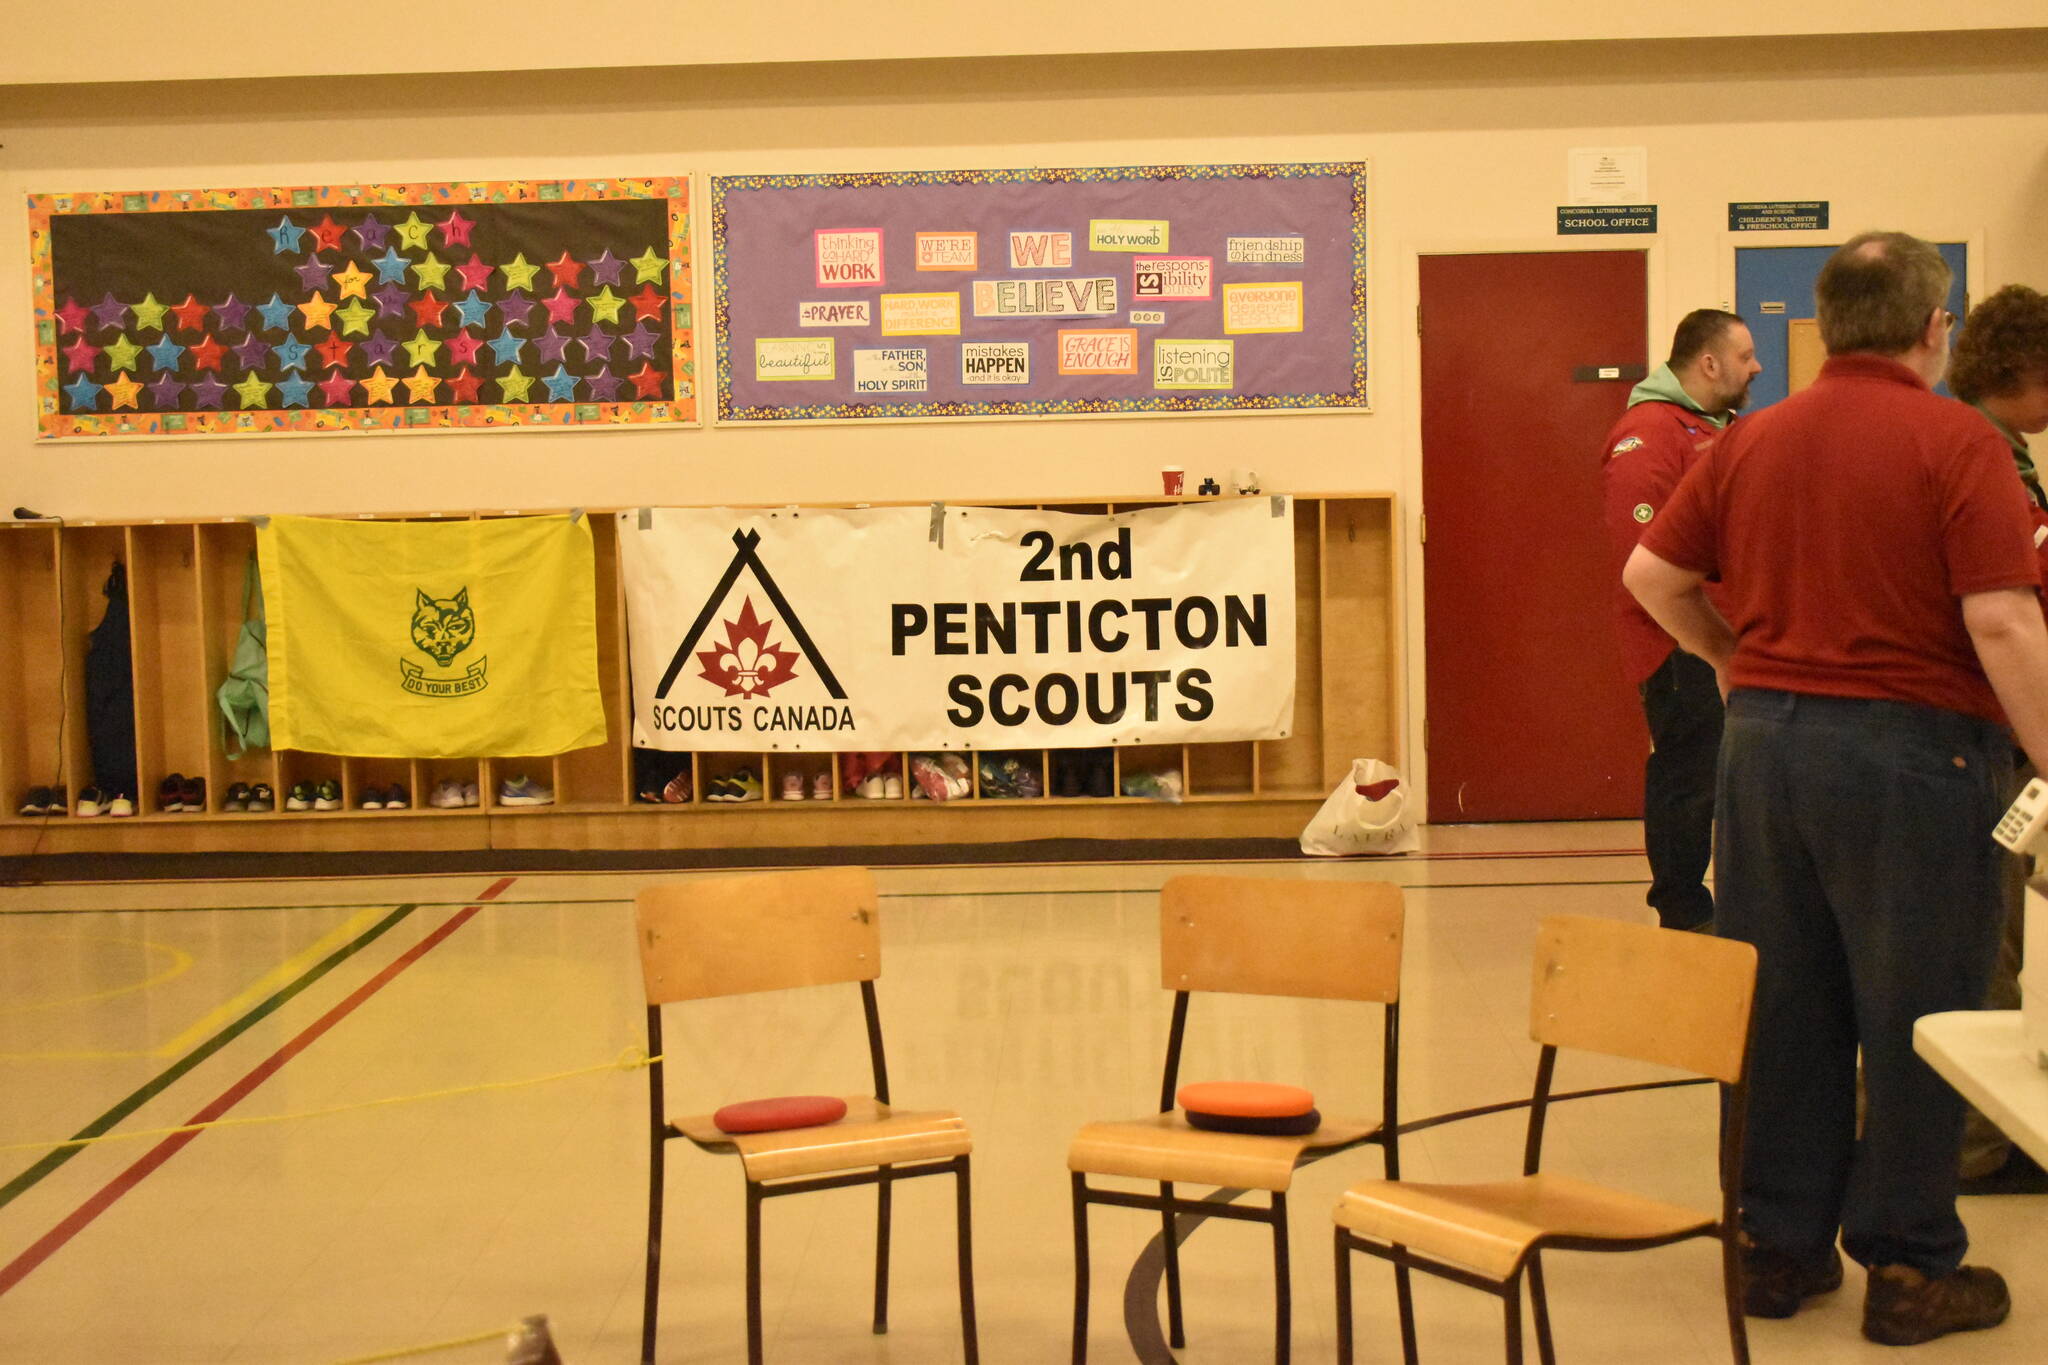 2nd Penticton Scouts returned to indoor gatherings in the spring of 2022 after a two-year pandemic hiatus.